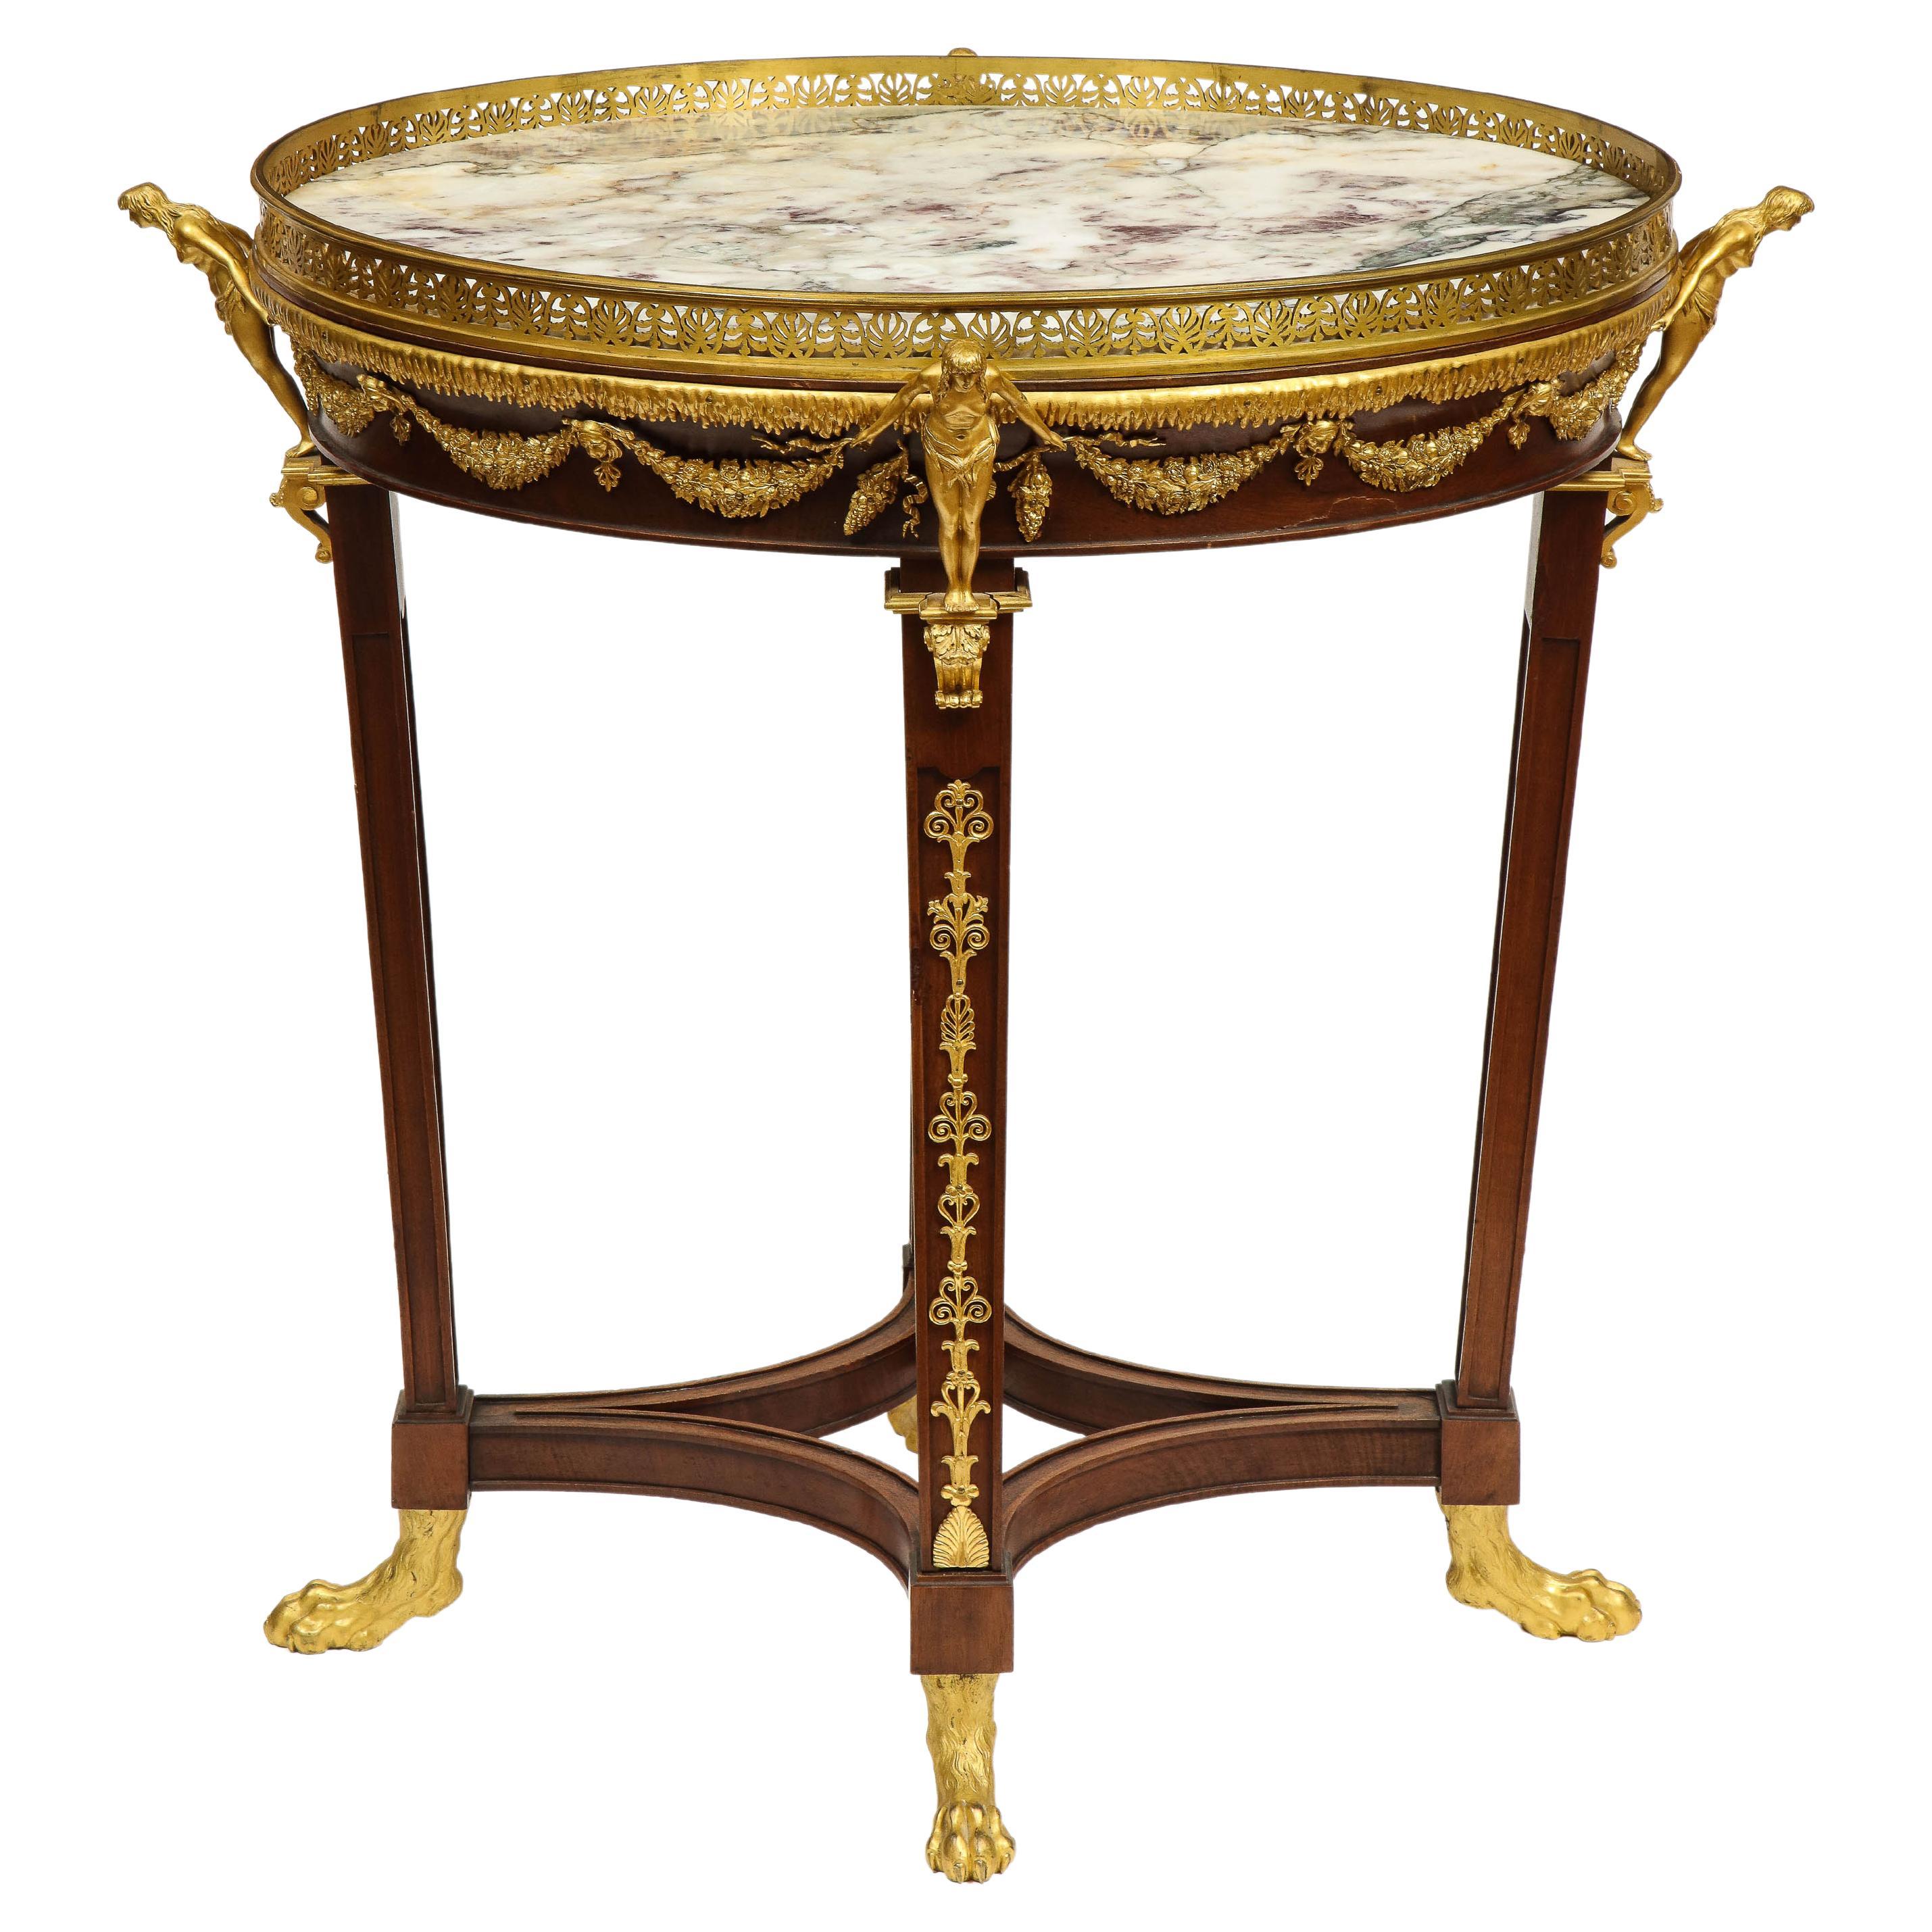 Extremely Fine Russian Empire Ormolu Mounted Mahogany Center Table For Sale